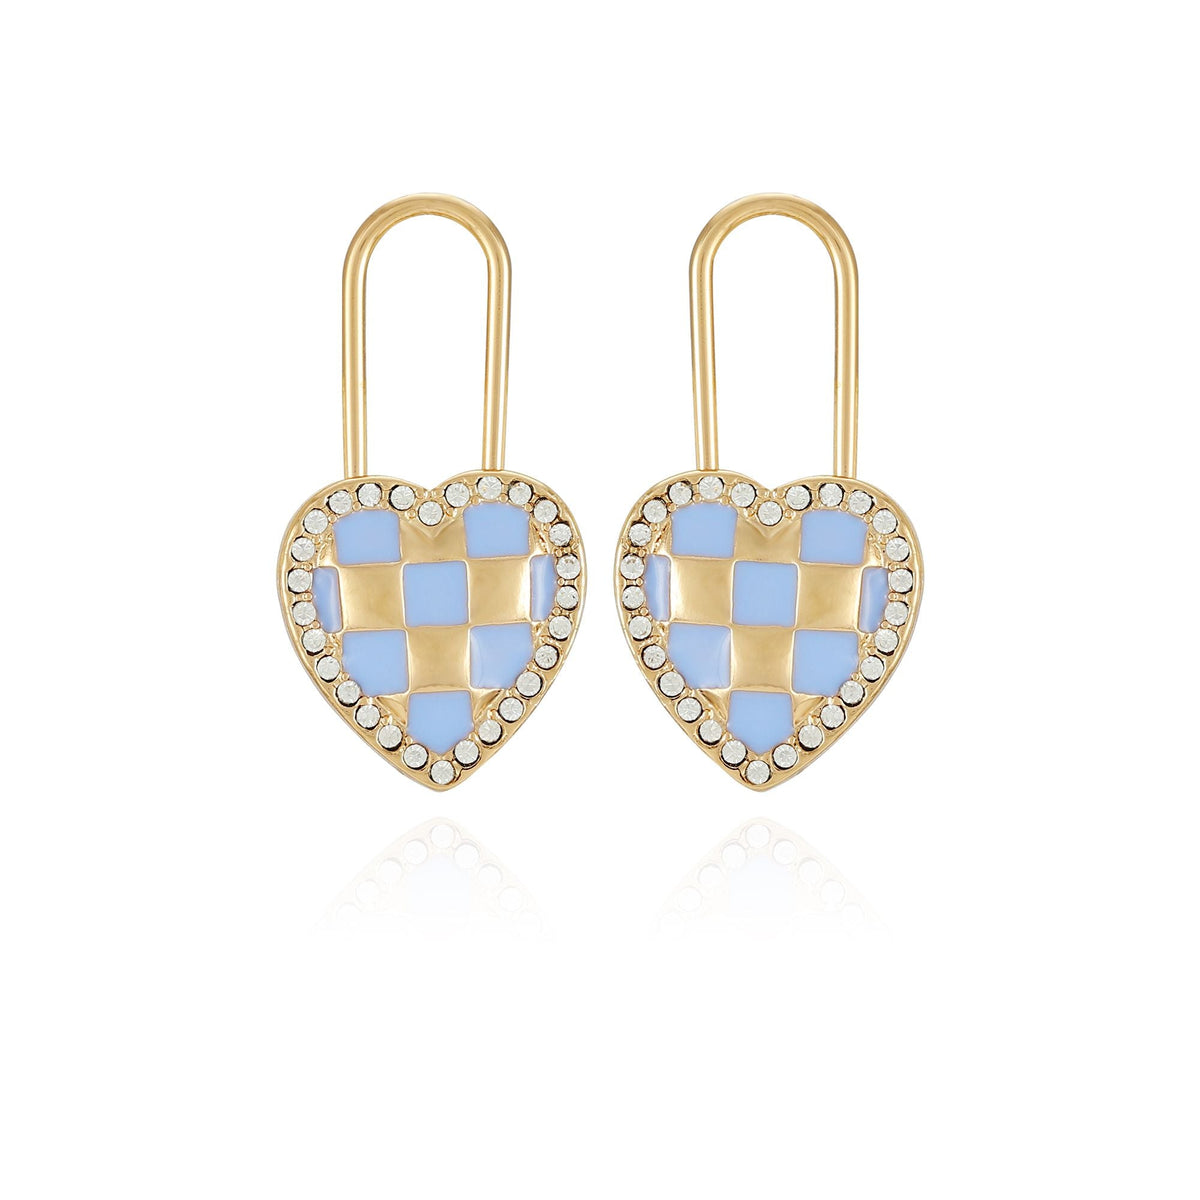 Juicy Couture Checkered Heart Lock Drop Earrings Gold